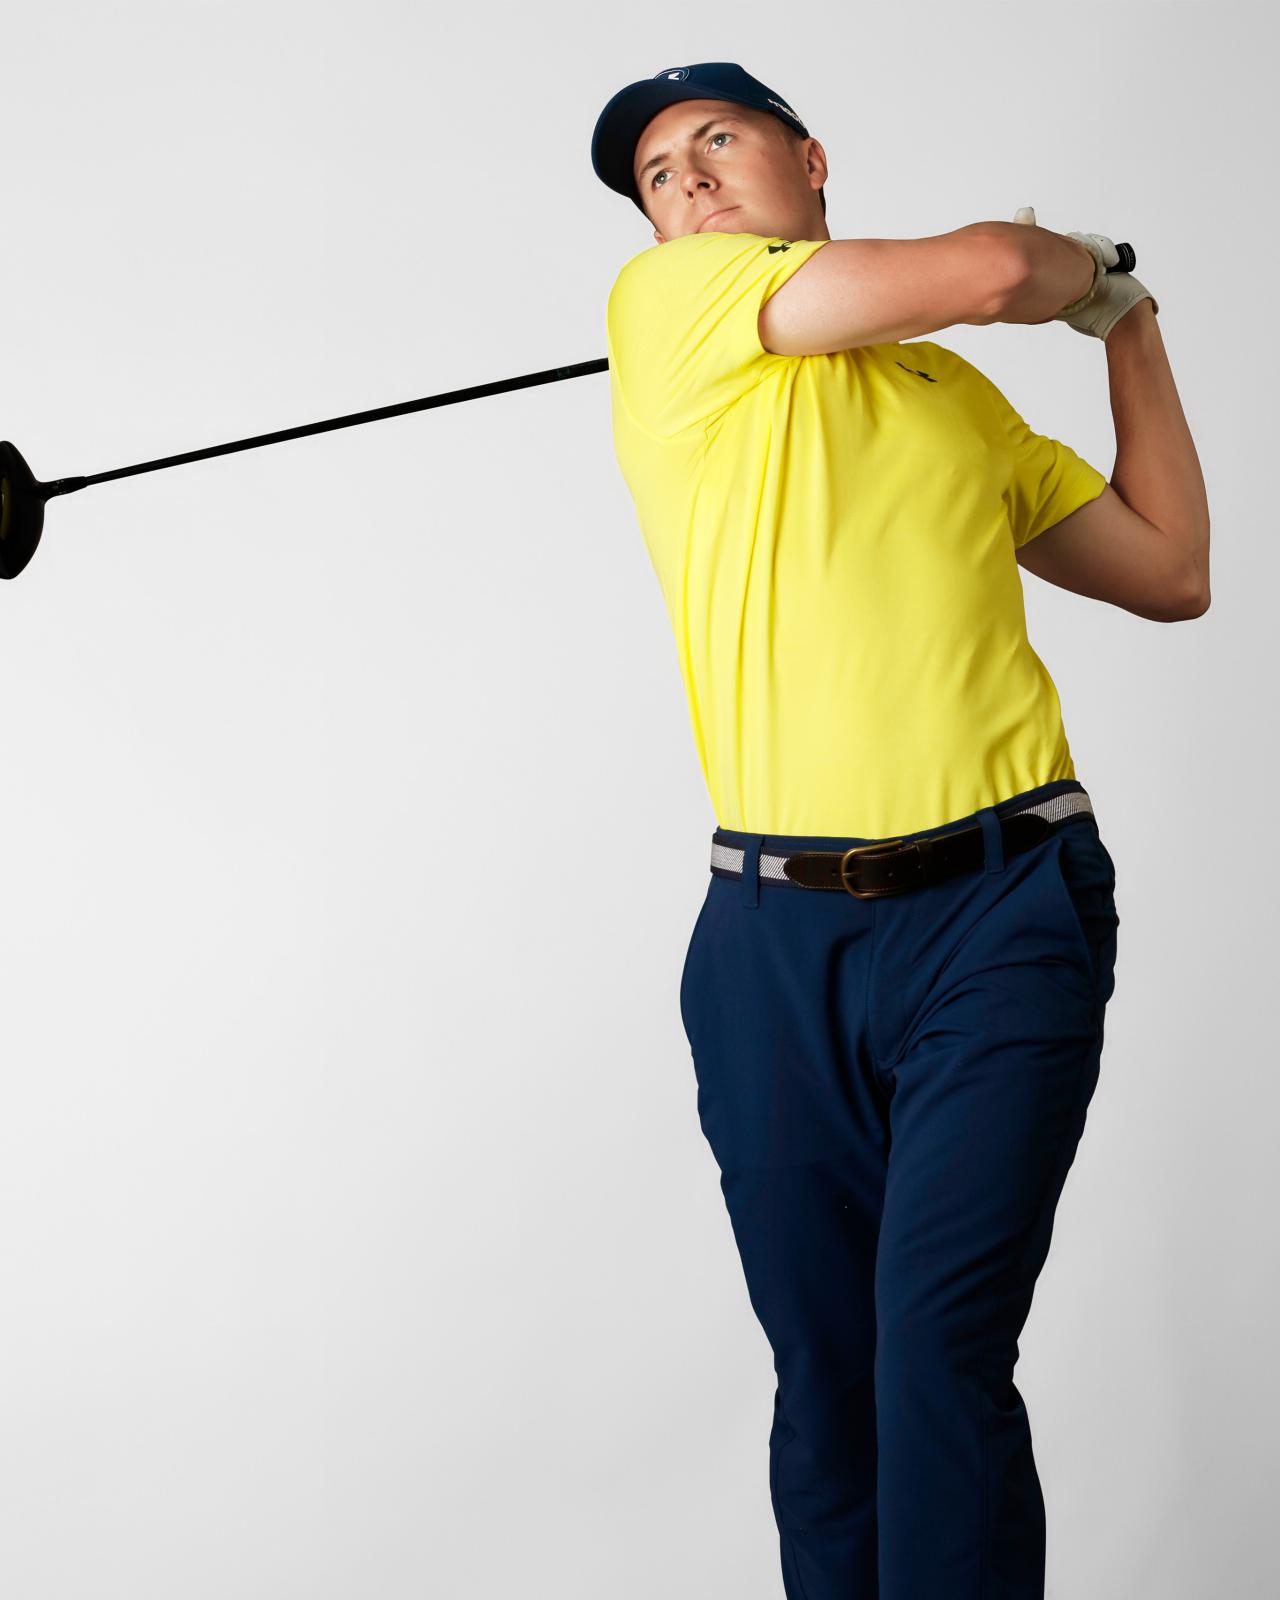 6 Best Golf Swing Tips with Photos